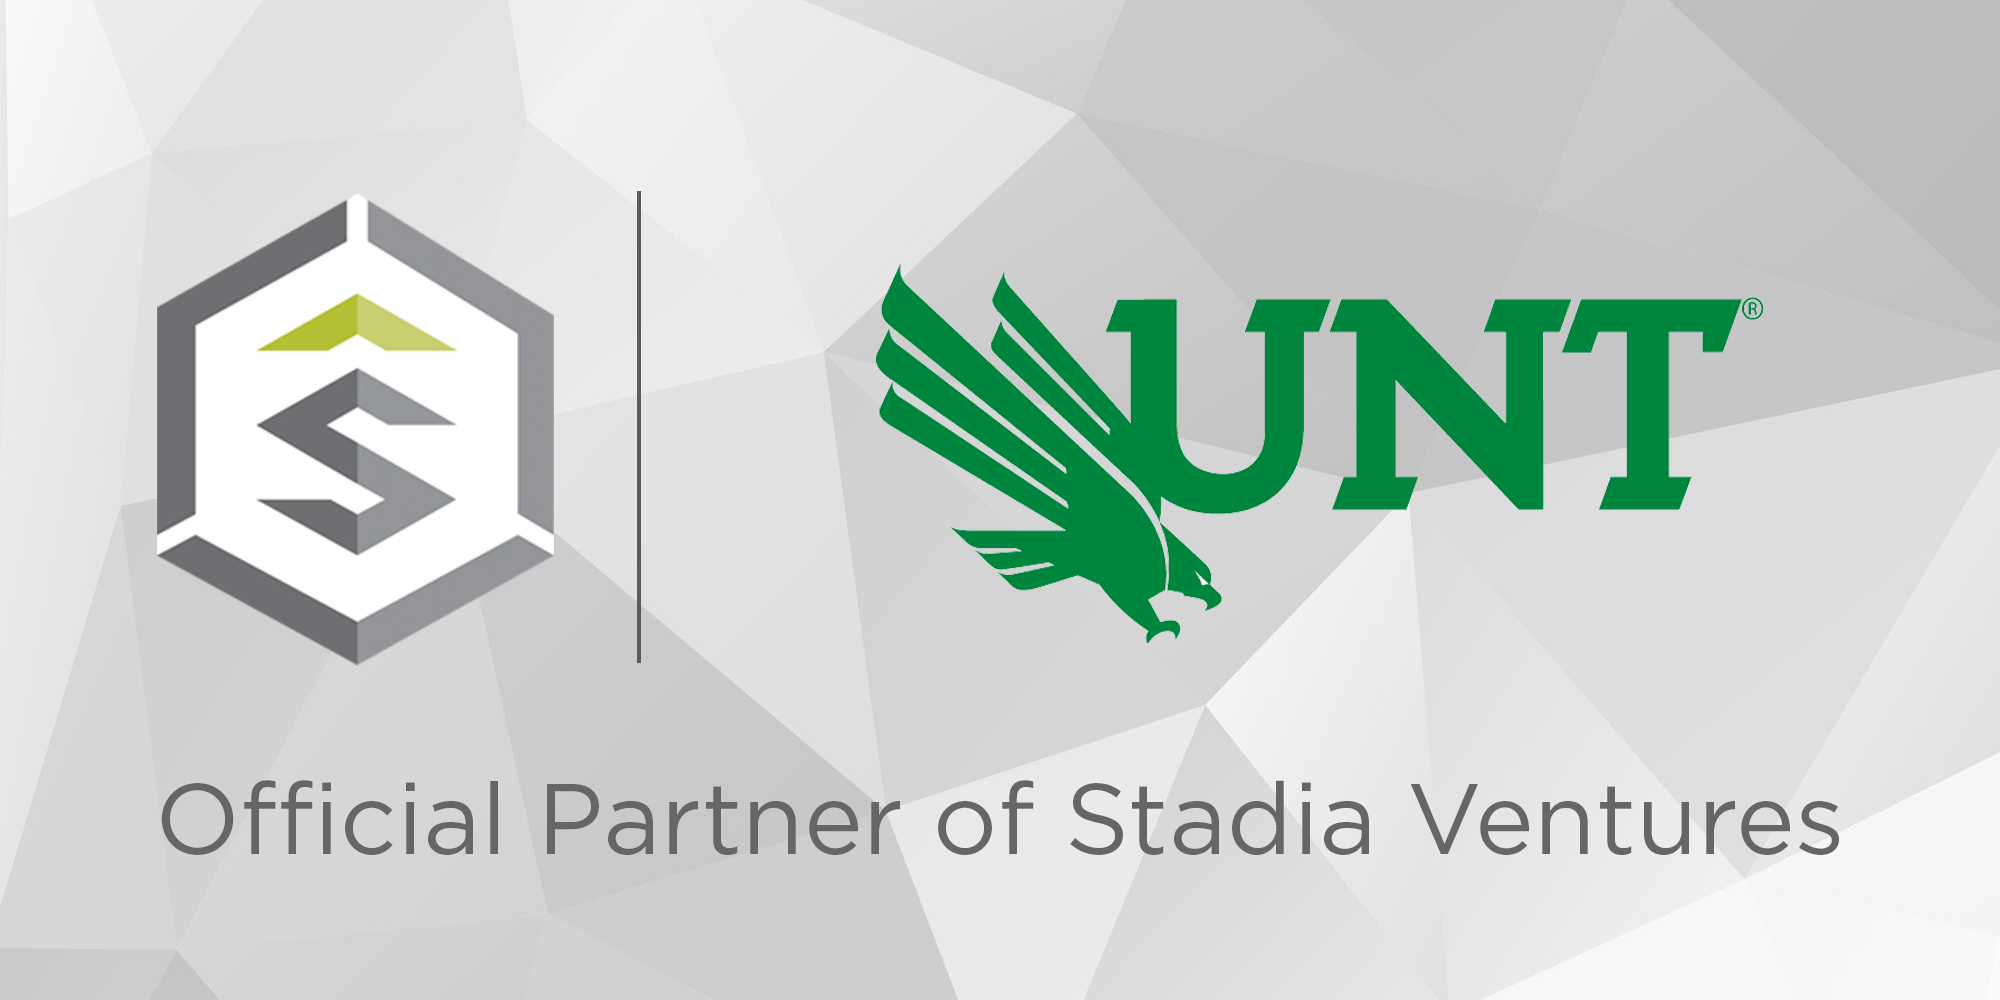 Stadia Ventures and UNT logos on gray background, with words reading 